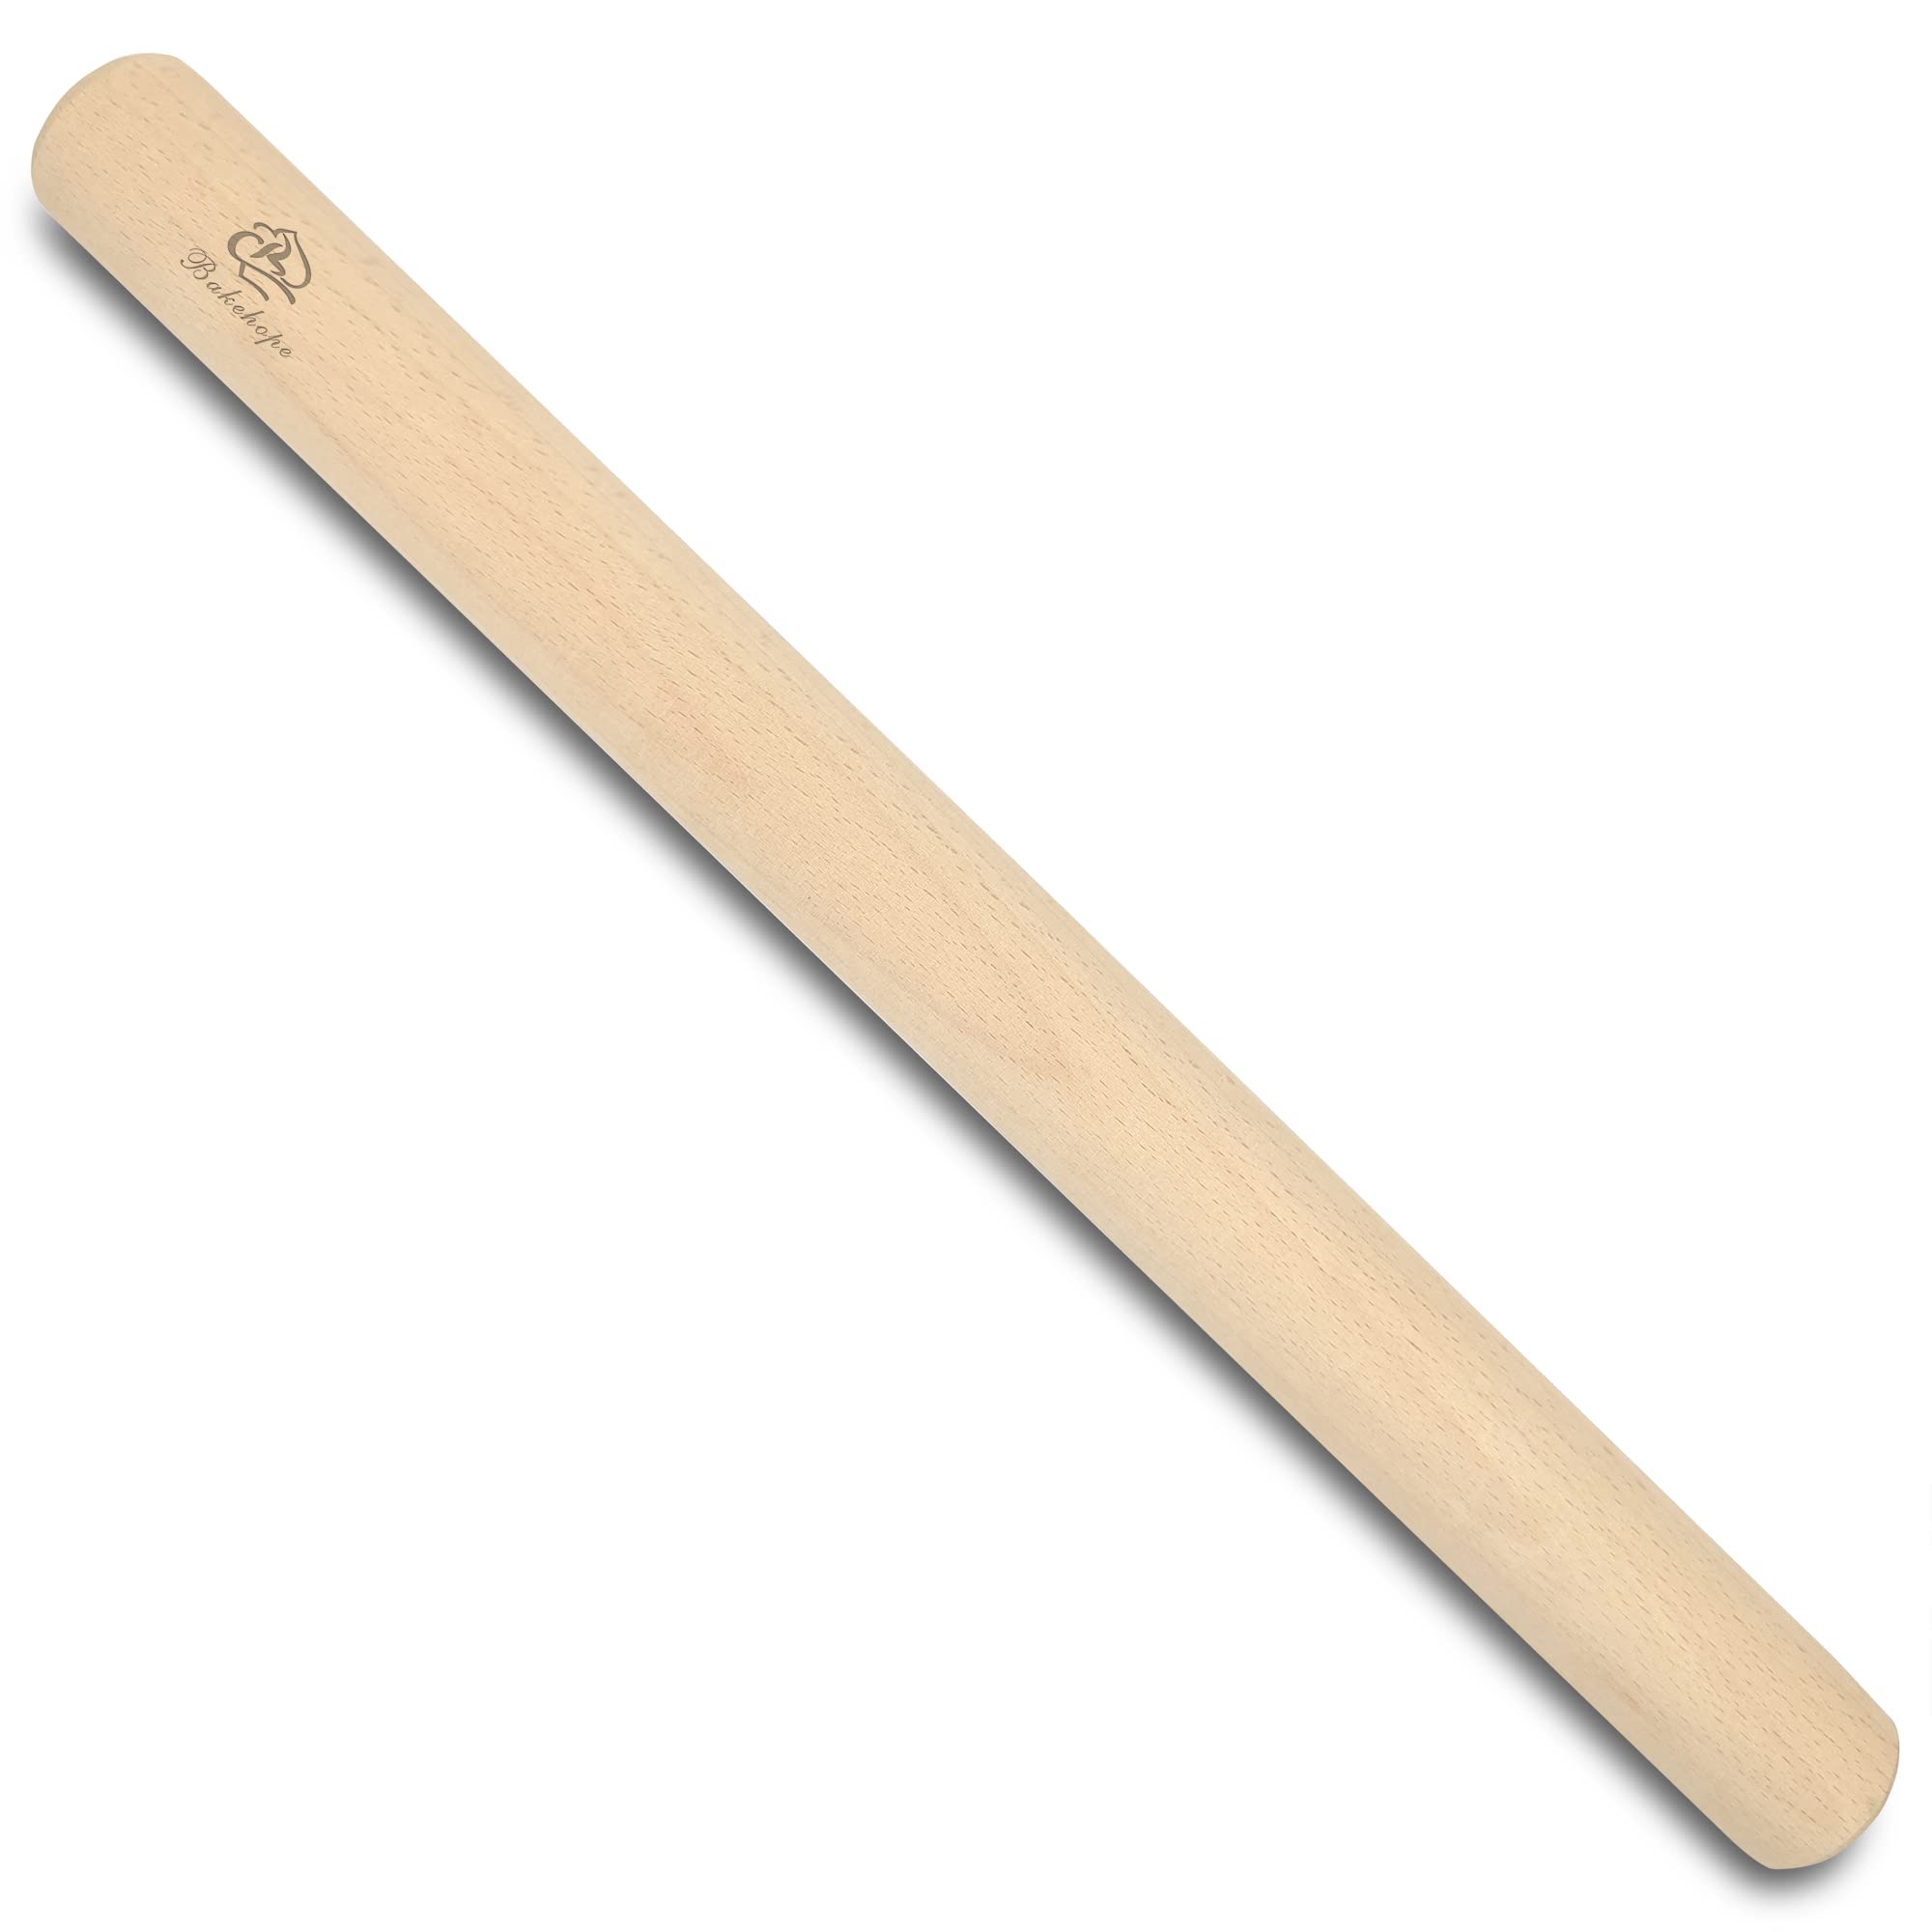 Bakehope Rolling Pin for Baking Pasta Pizza Bread, Natural Beech Wood Dough Roller(15.75 Inches, dowel)